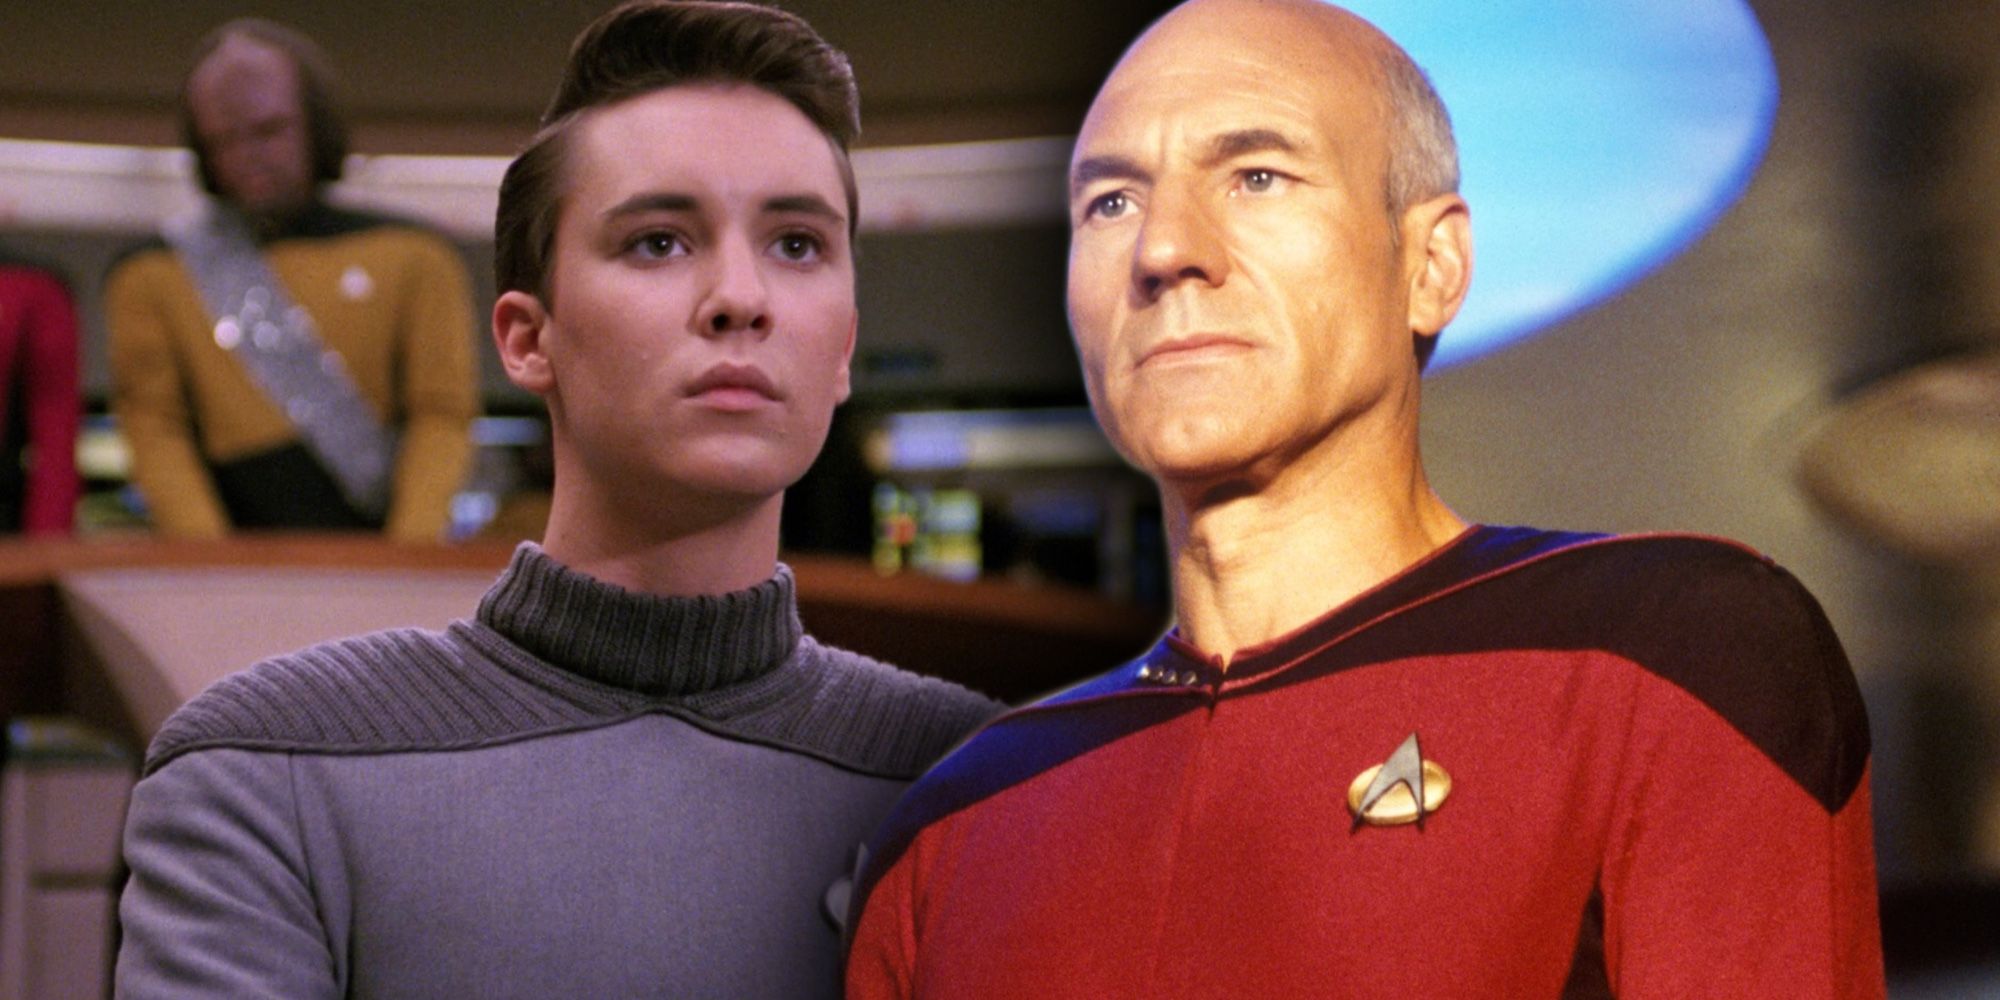 Jean-Luc Picard and Wesley Crusher in Star Trek The Next Generation